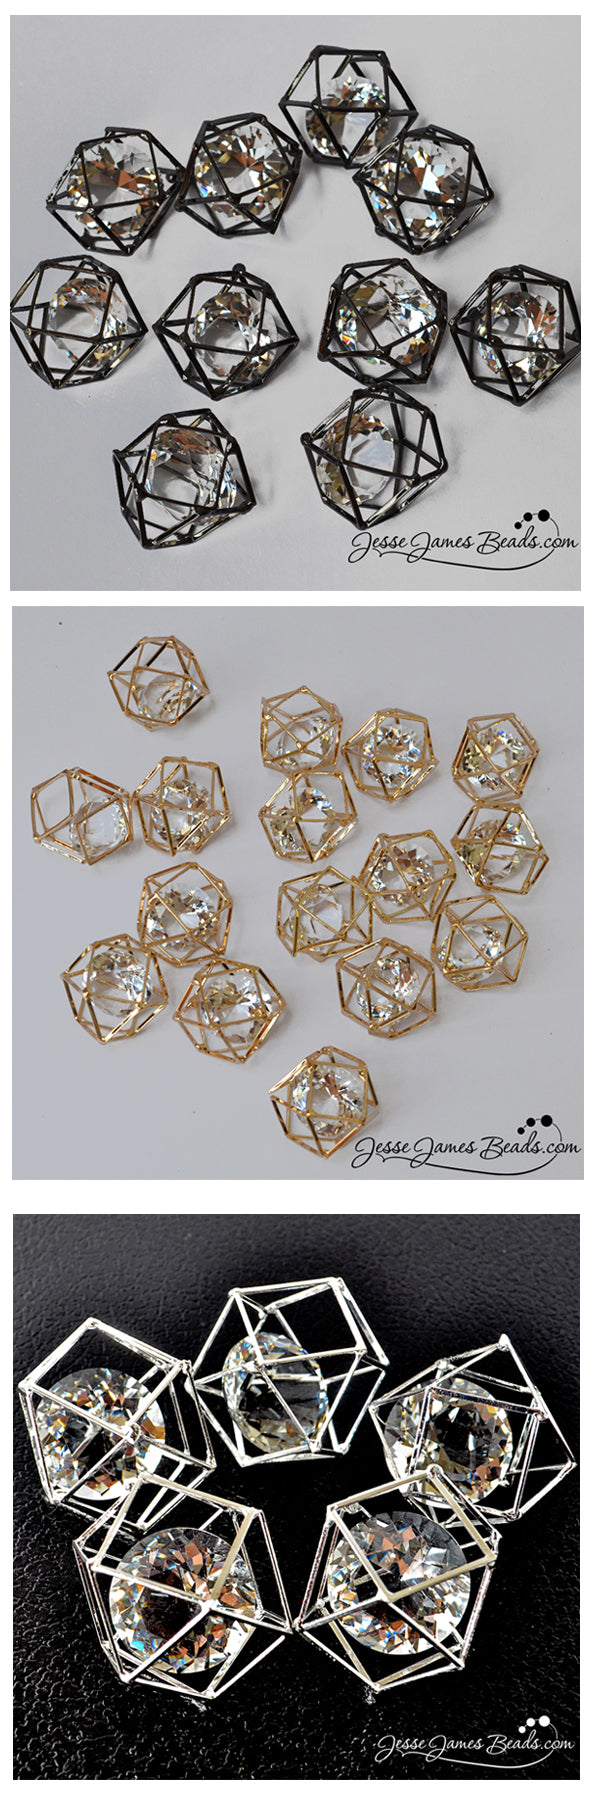 Cage Crystal Beads from Jesse James Beads